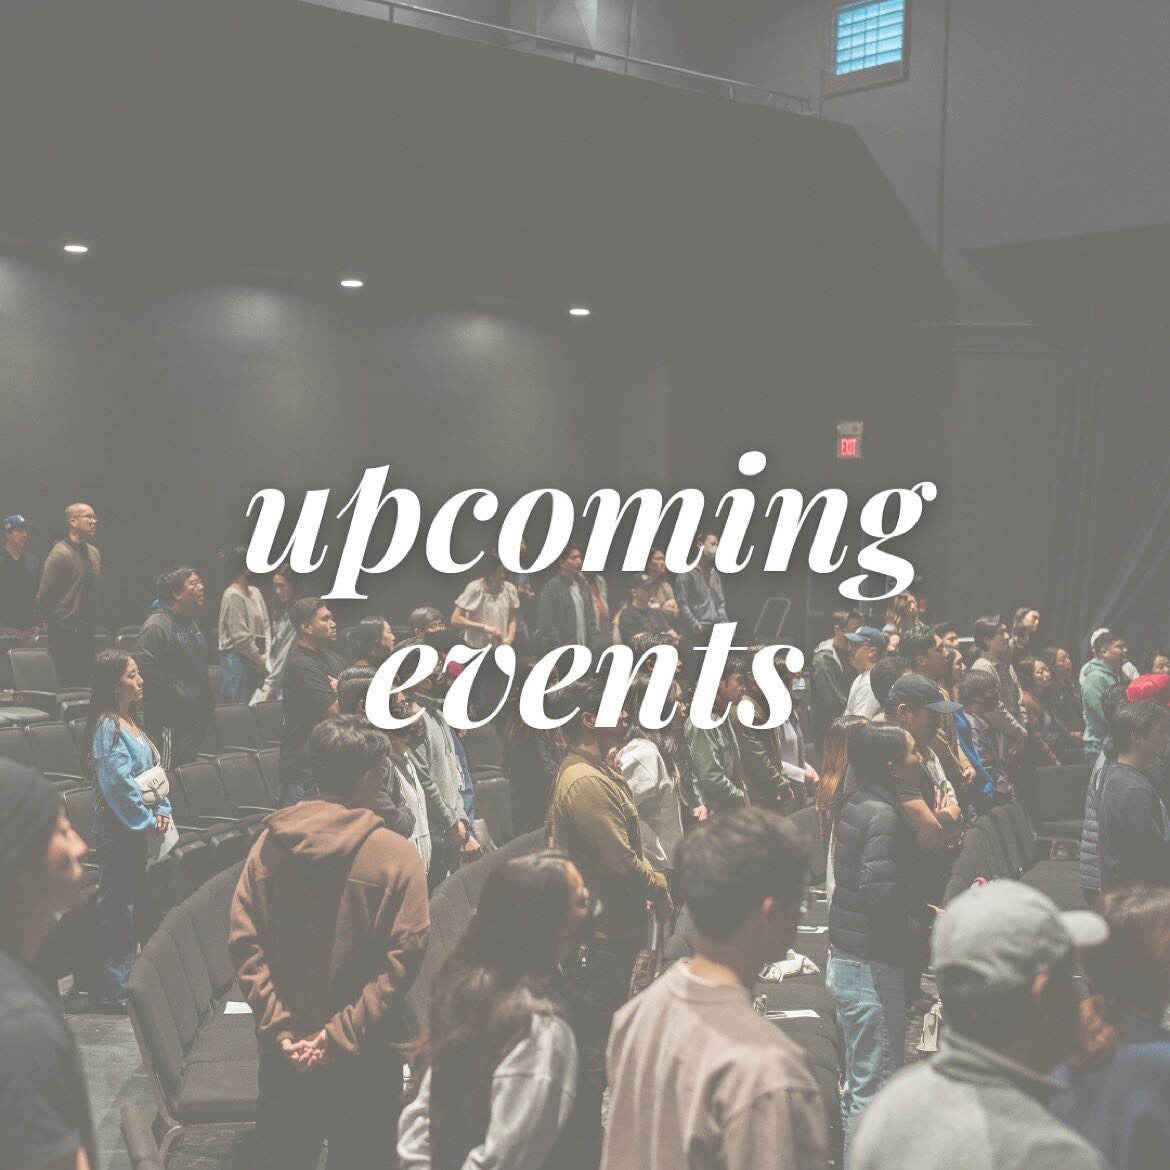 Take a look at our upcoming events in the month of April!